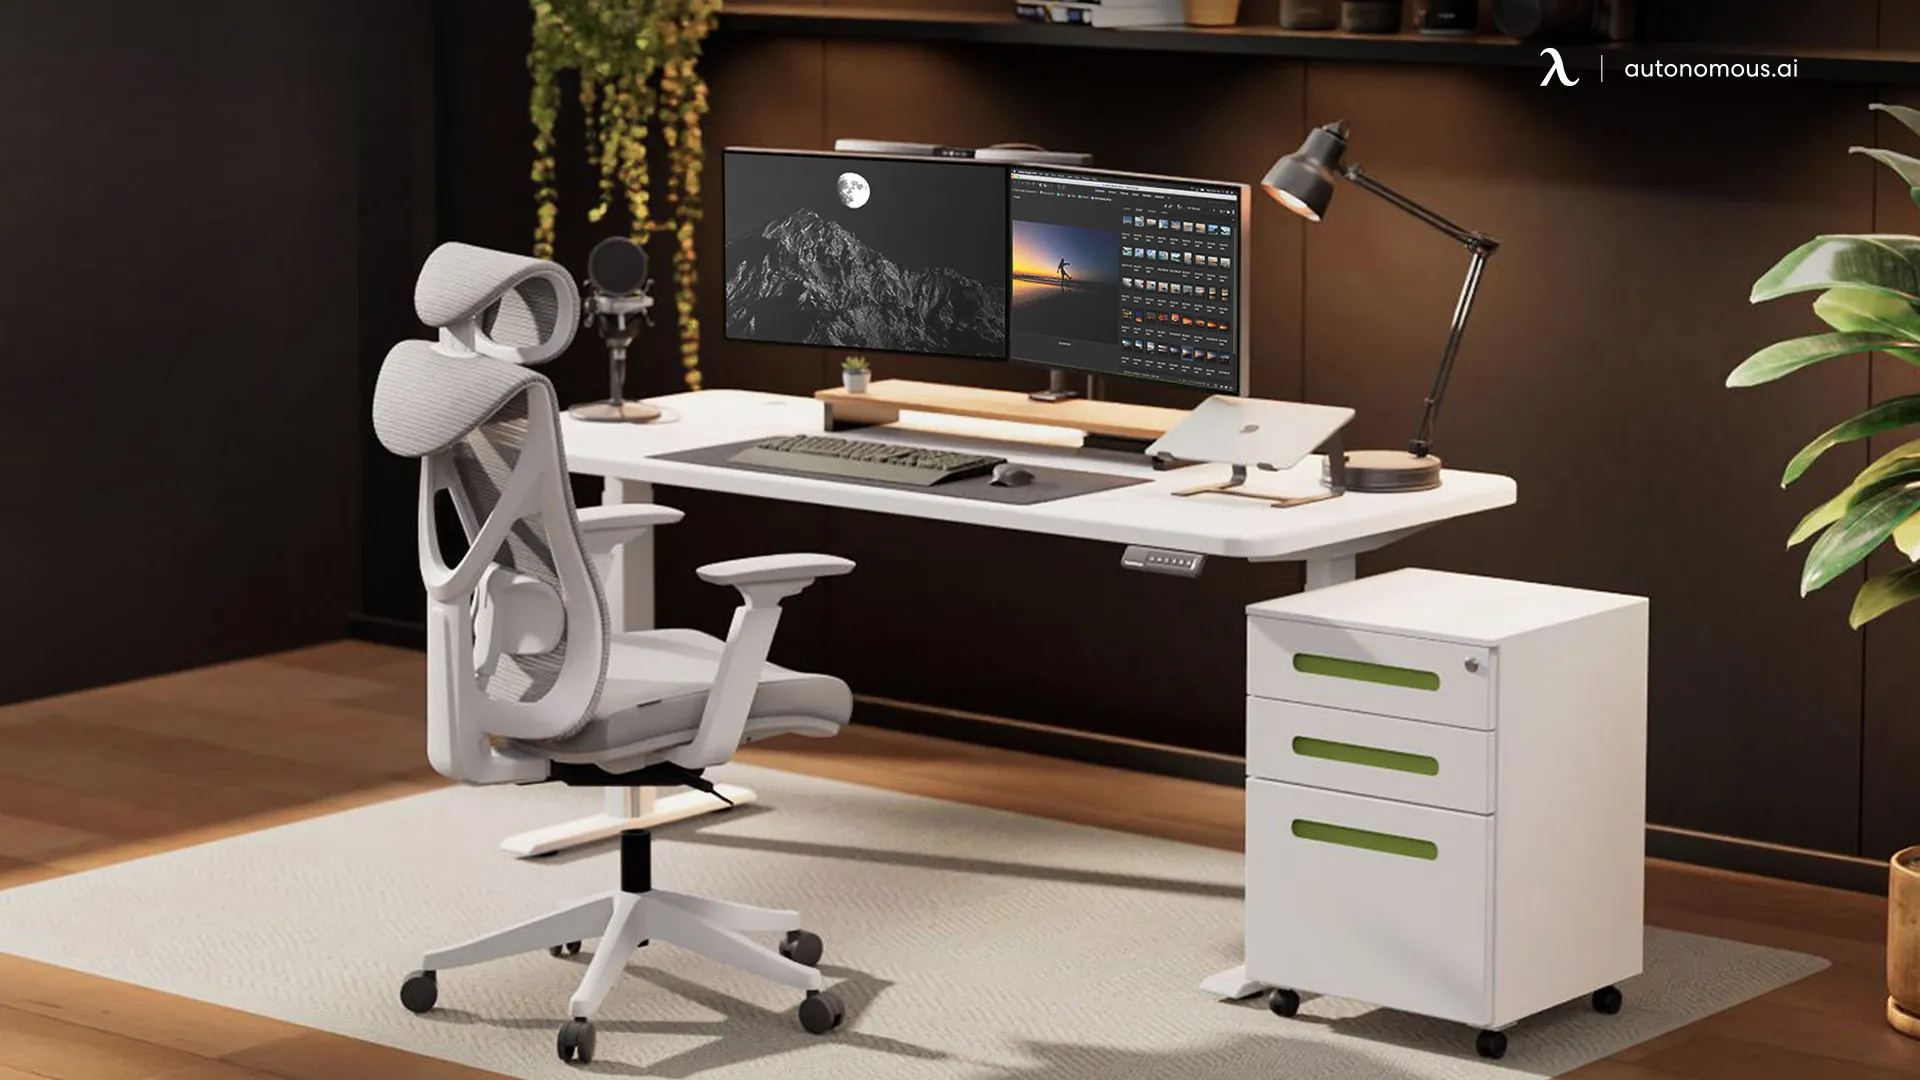 Additional Tips for Selecting the Ideal Desk